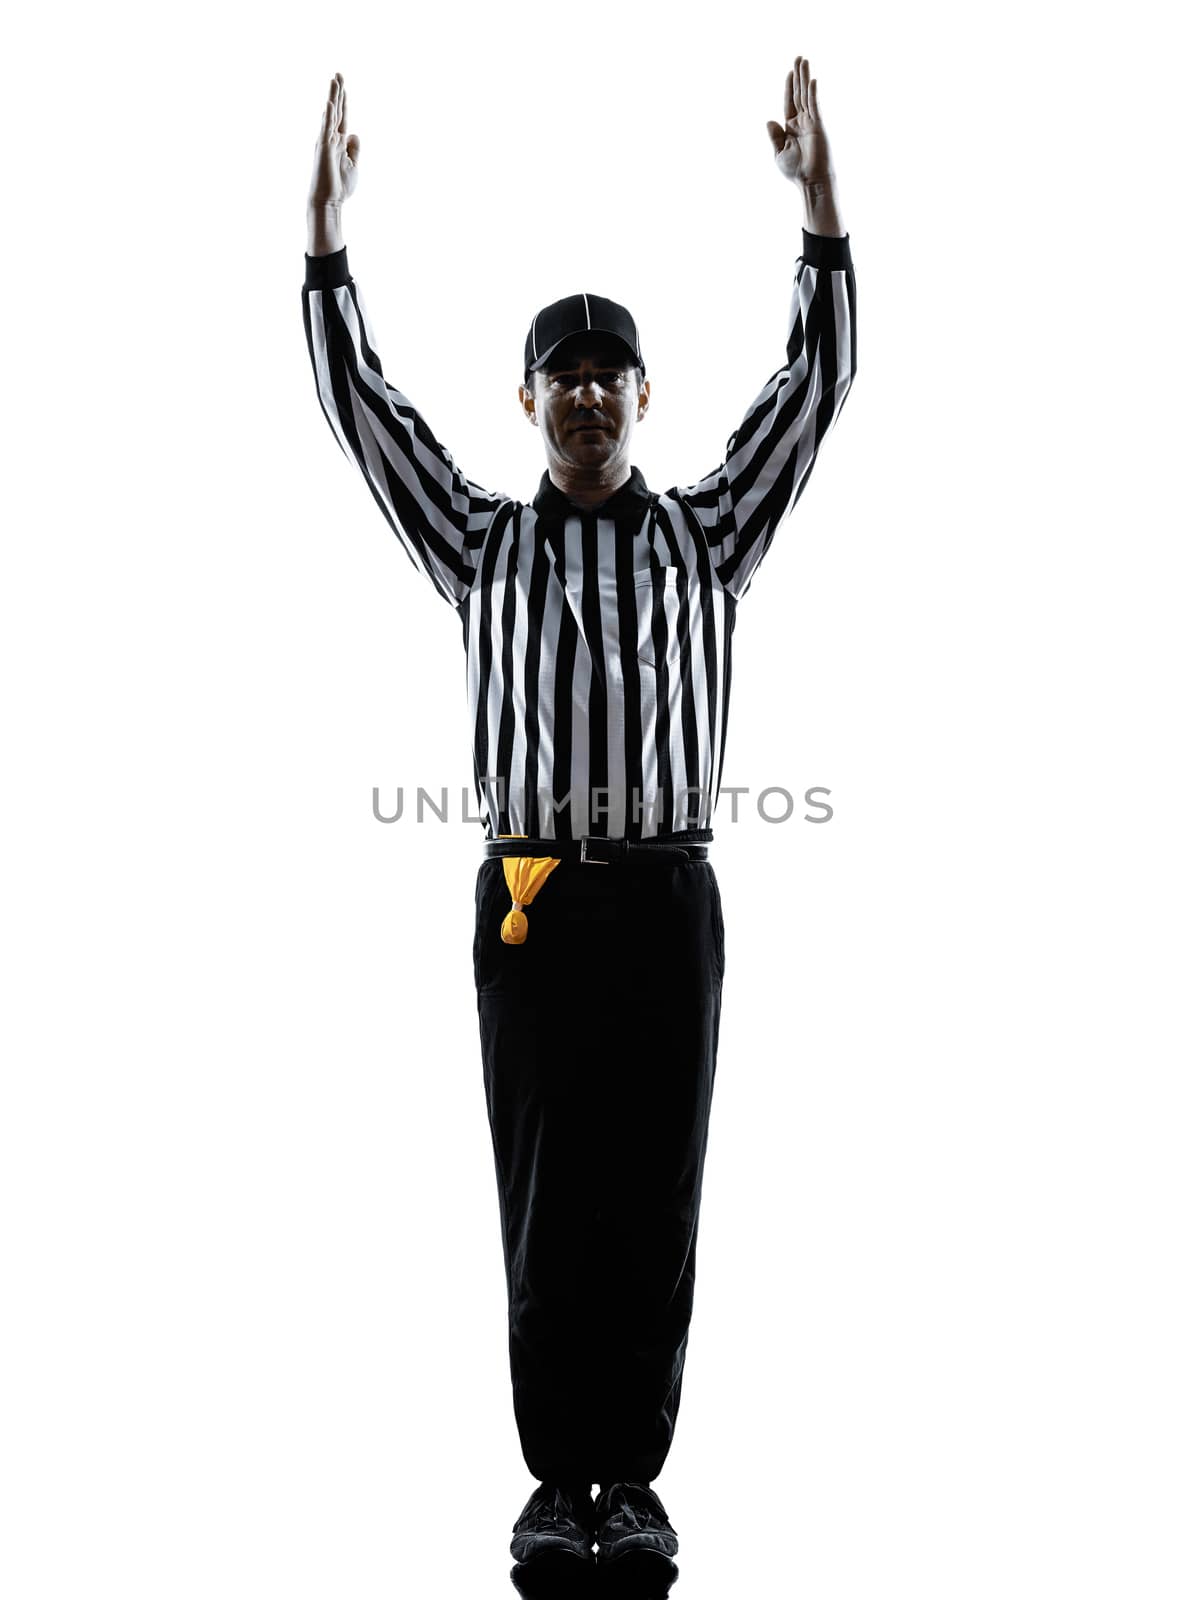 american football referee touchdown gestures in silhouettes on white background